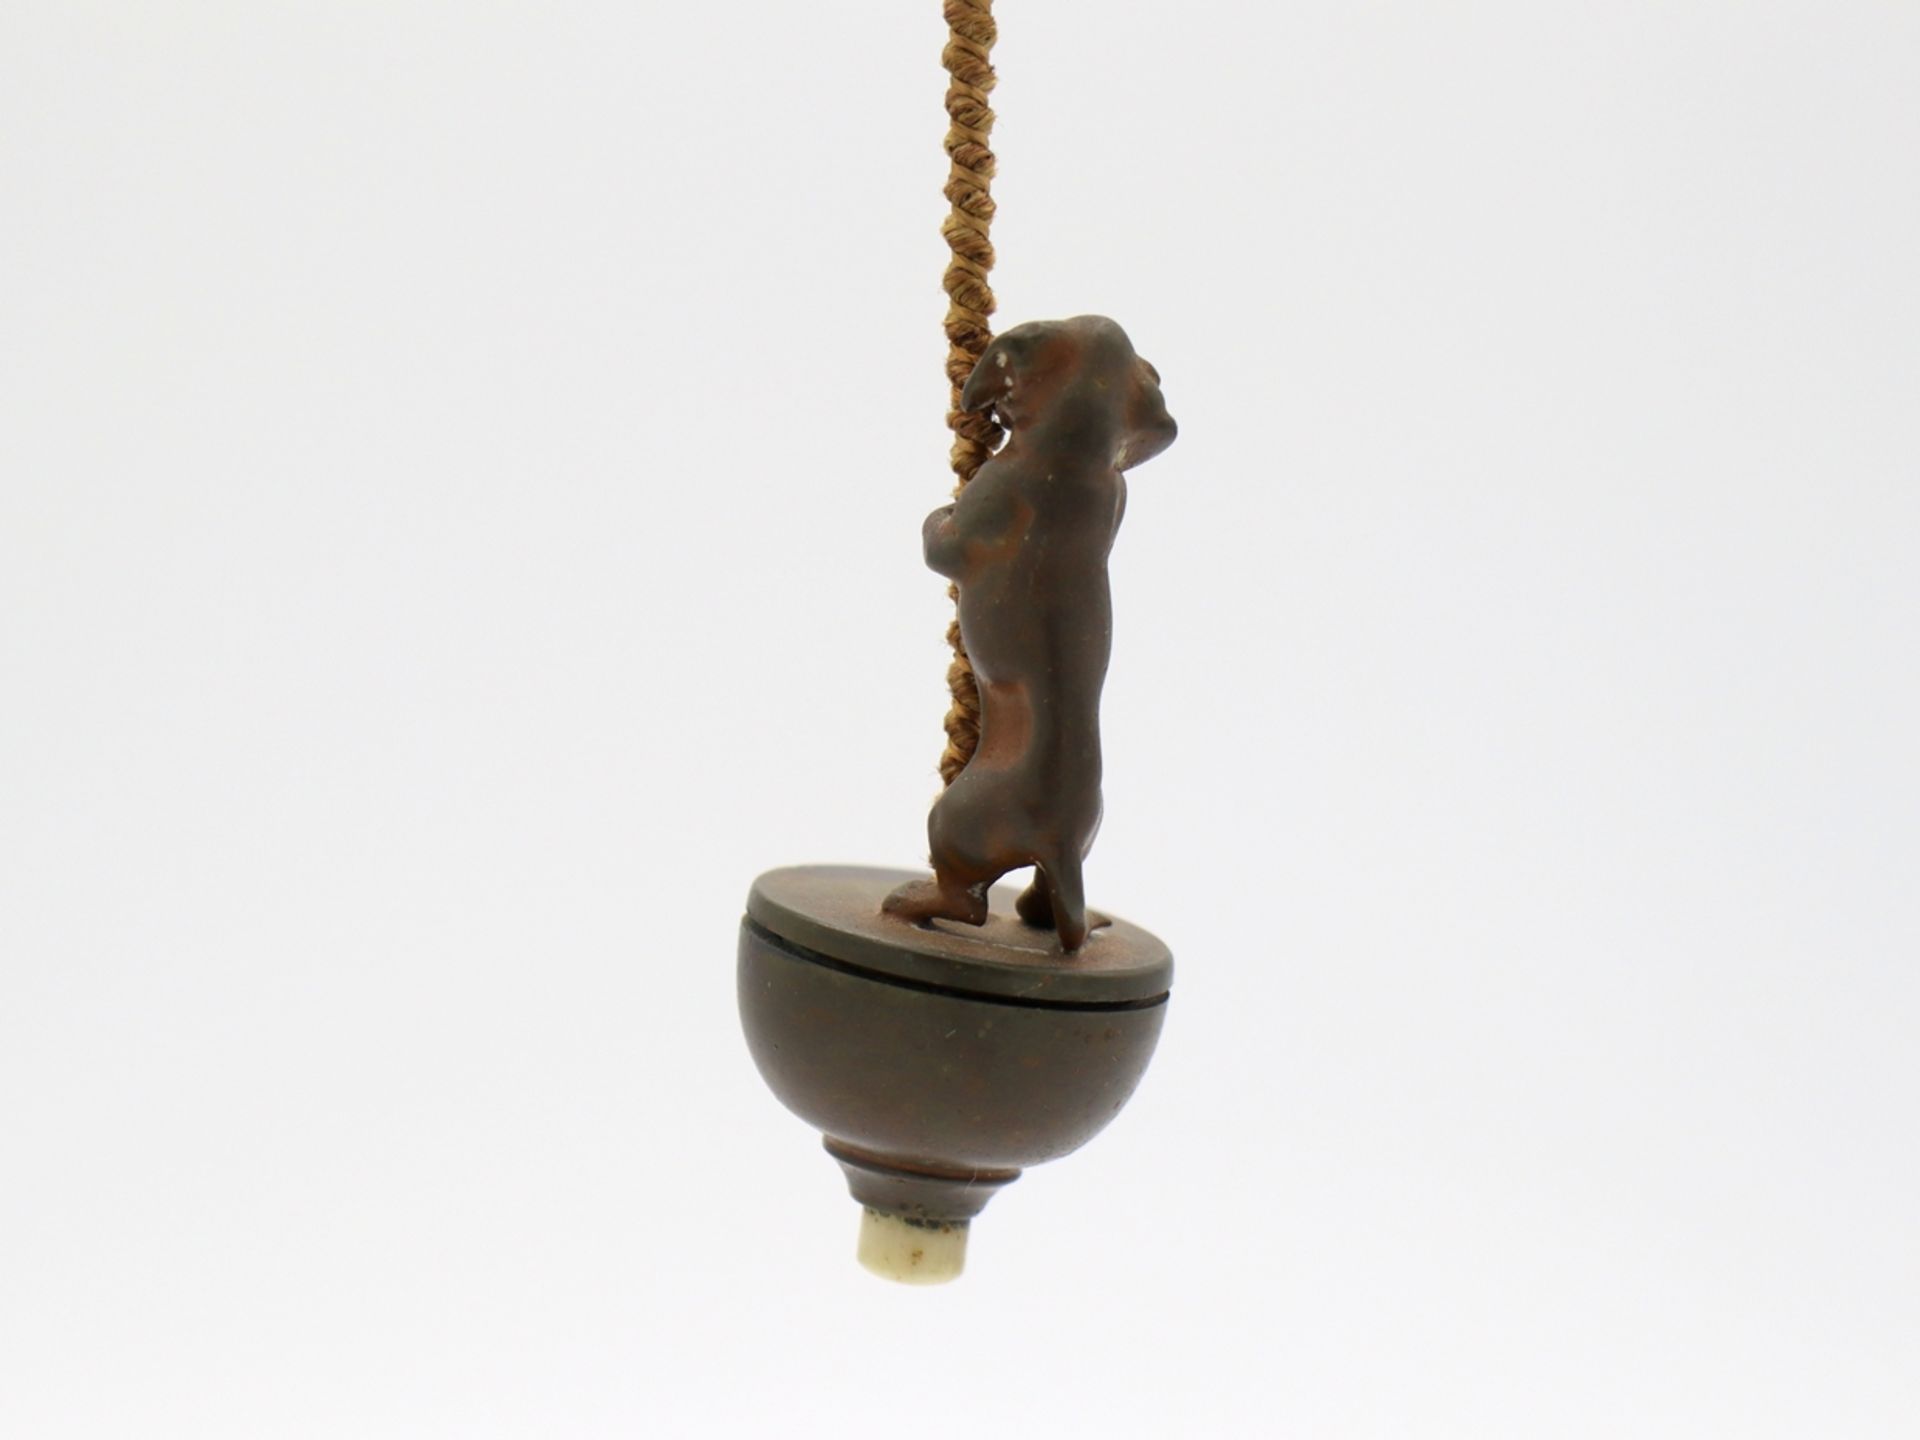 Table Bell Bronze Dachshund, c. 1910 - Image 3 of 5